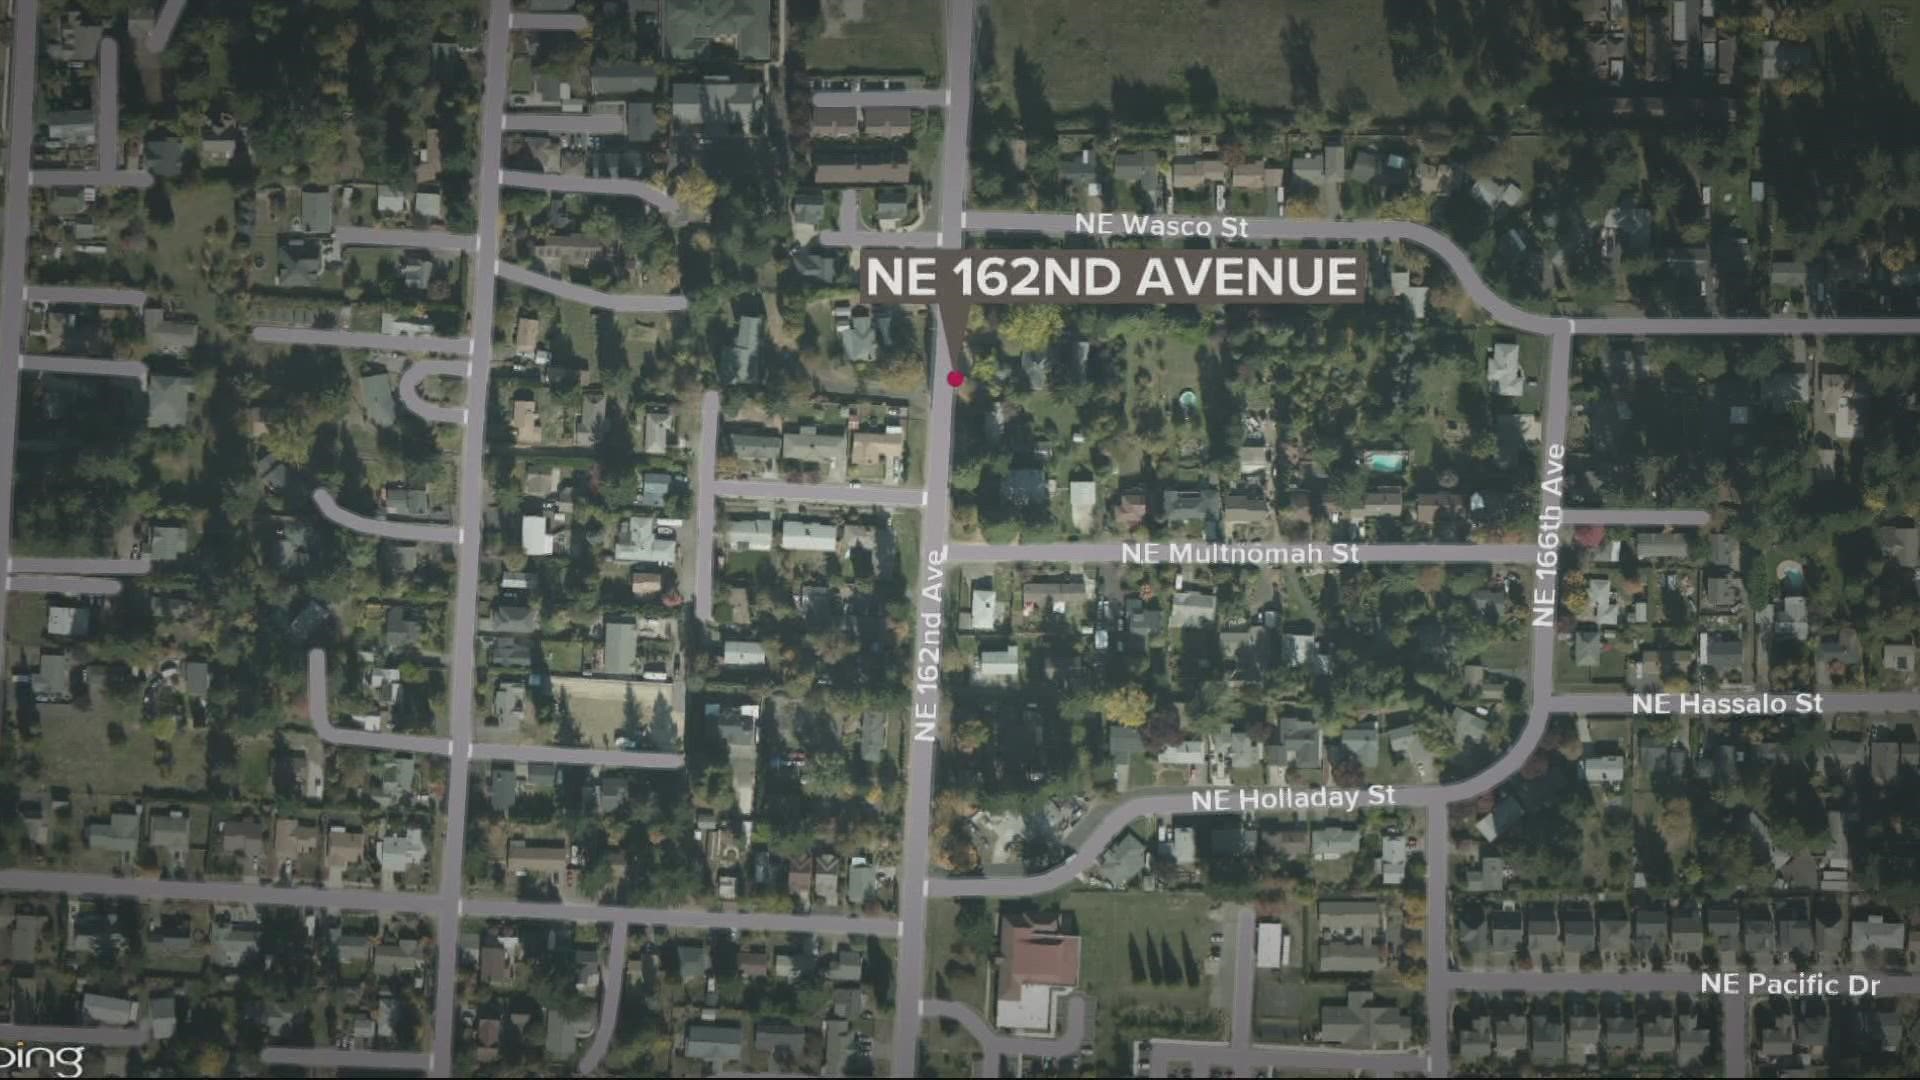 The shooting happened shortly after 10 p.m. in the area of Northeast 162nd Avenue and Wasco Street in Portland.